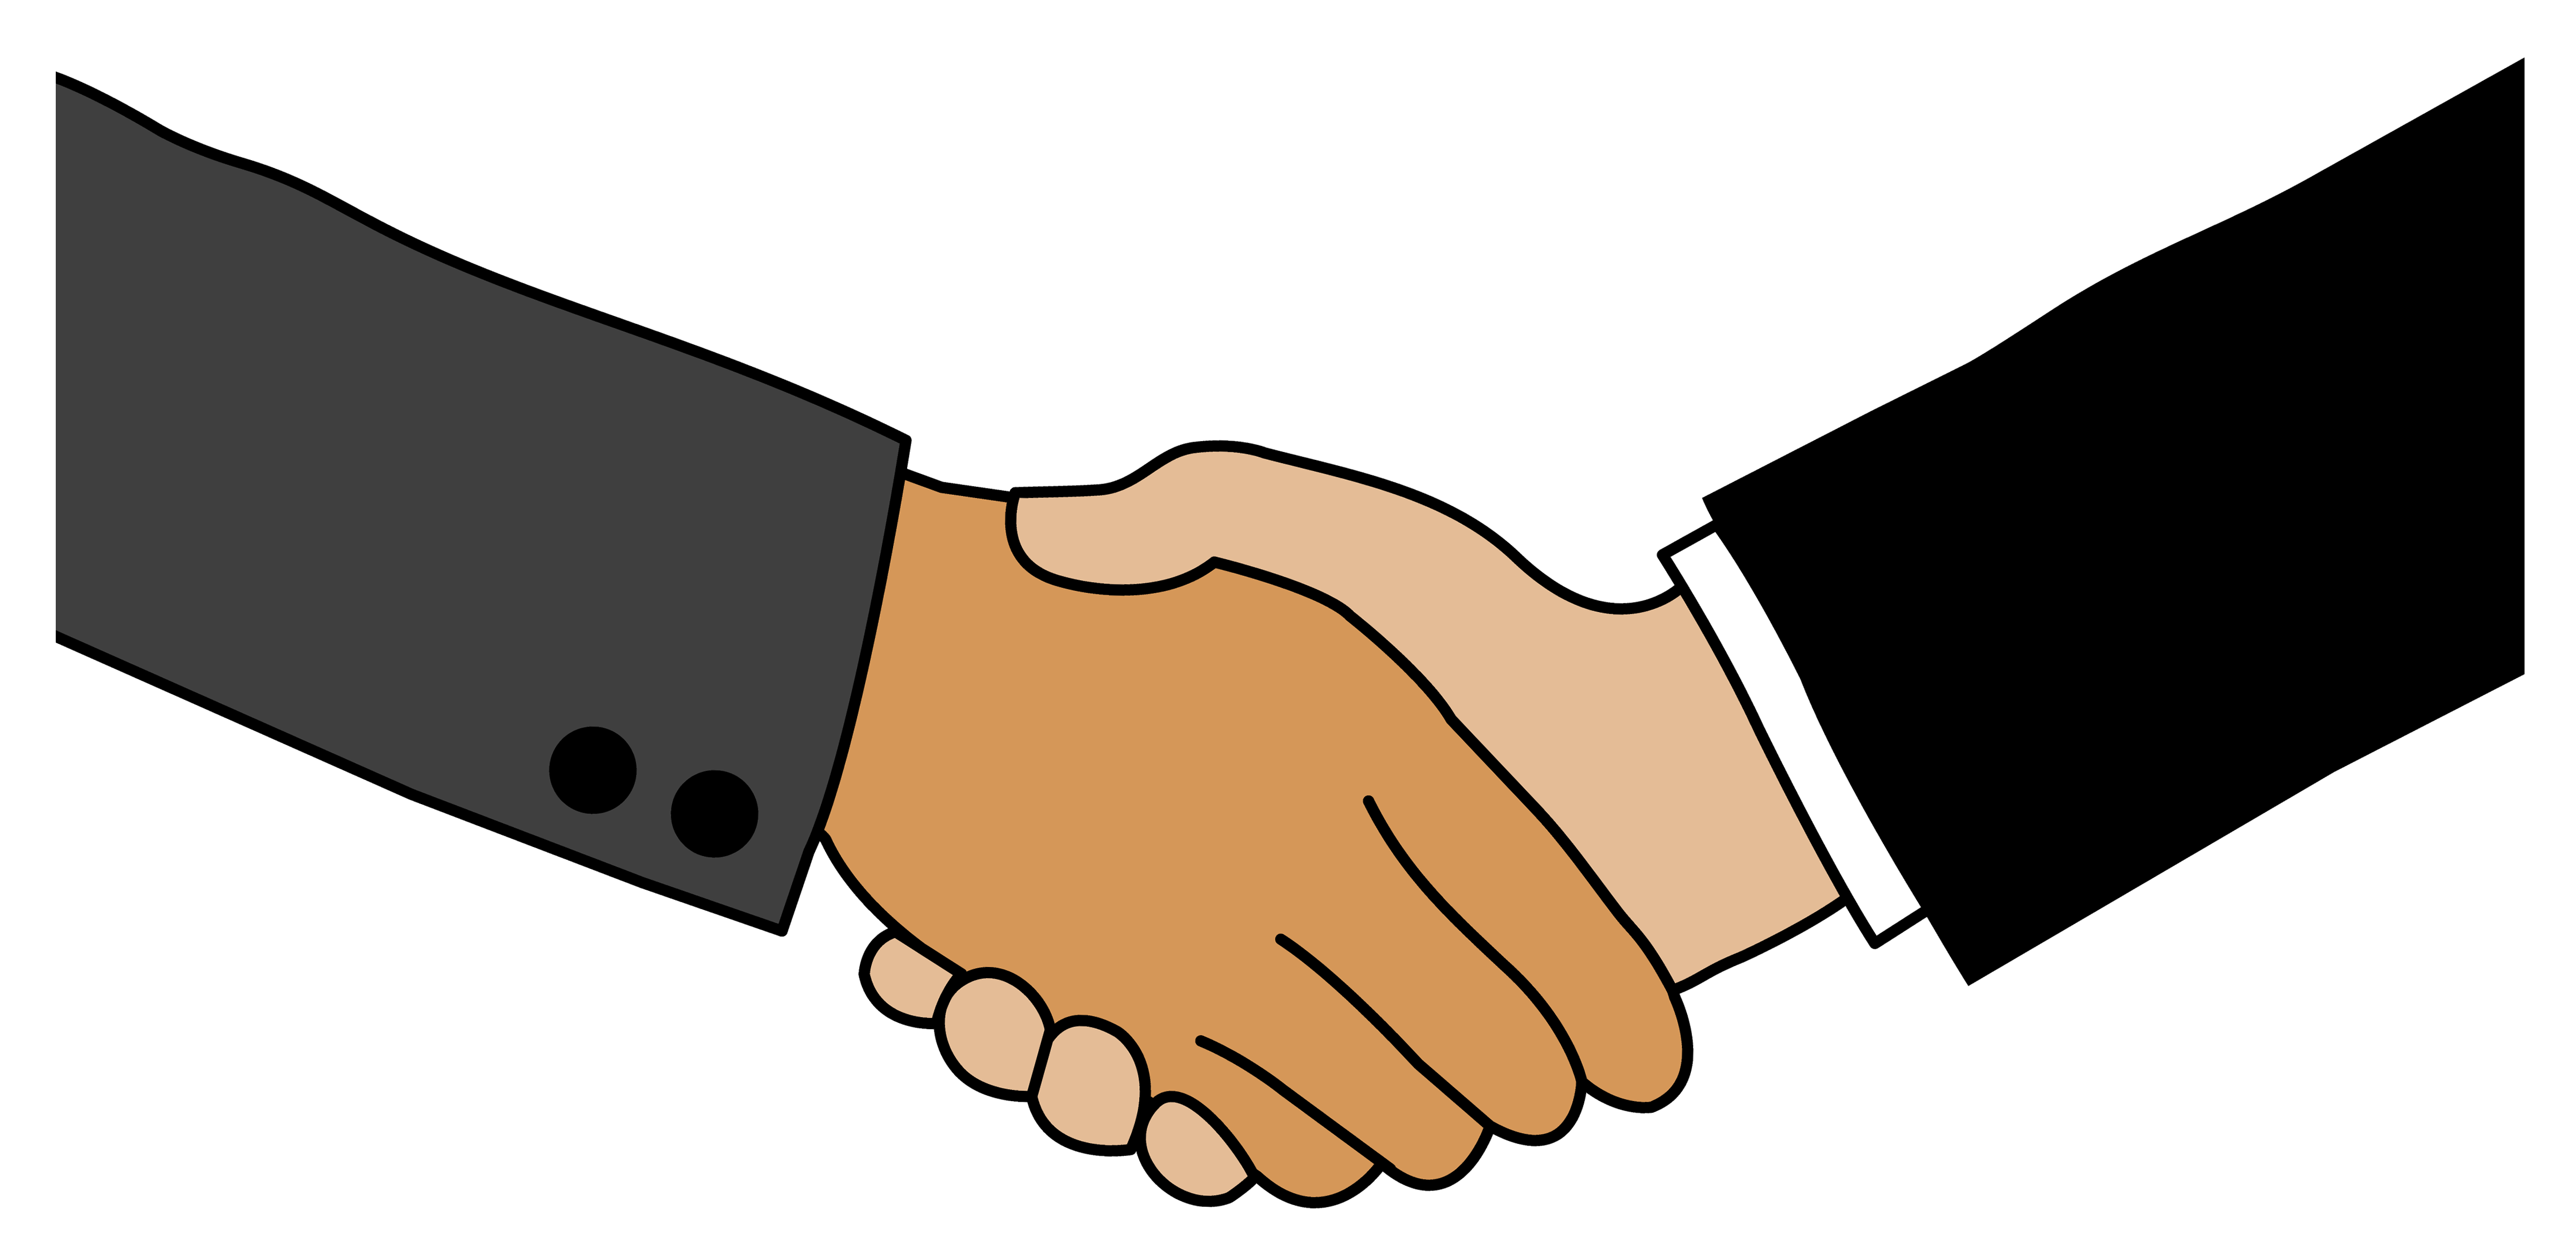 Business People Shaking Hands Clip Art | Clipart Panda - Free ...